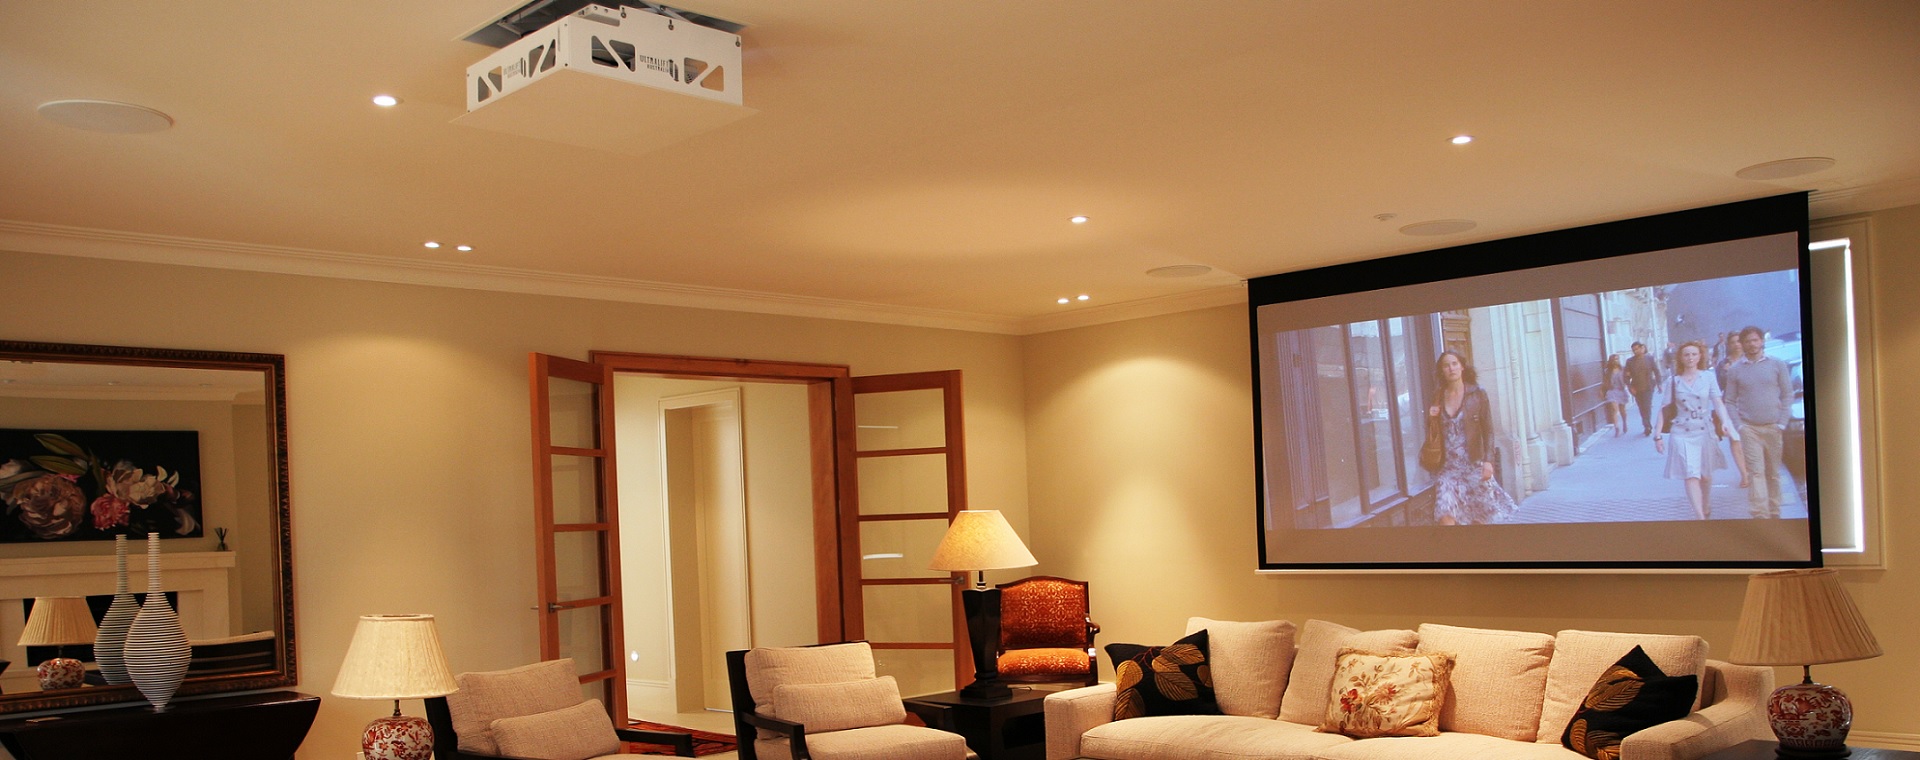 Home theatre with lighting control, drop down projector screen, in-ceiling speakers, controlled via home automation.